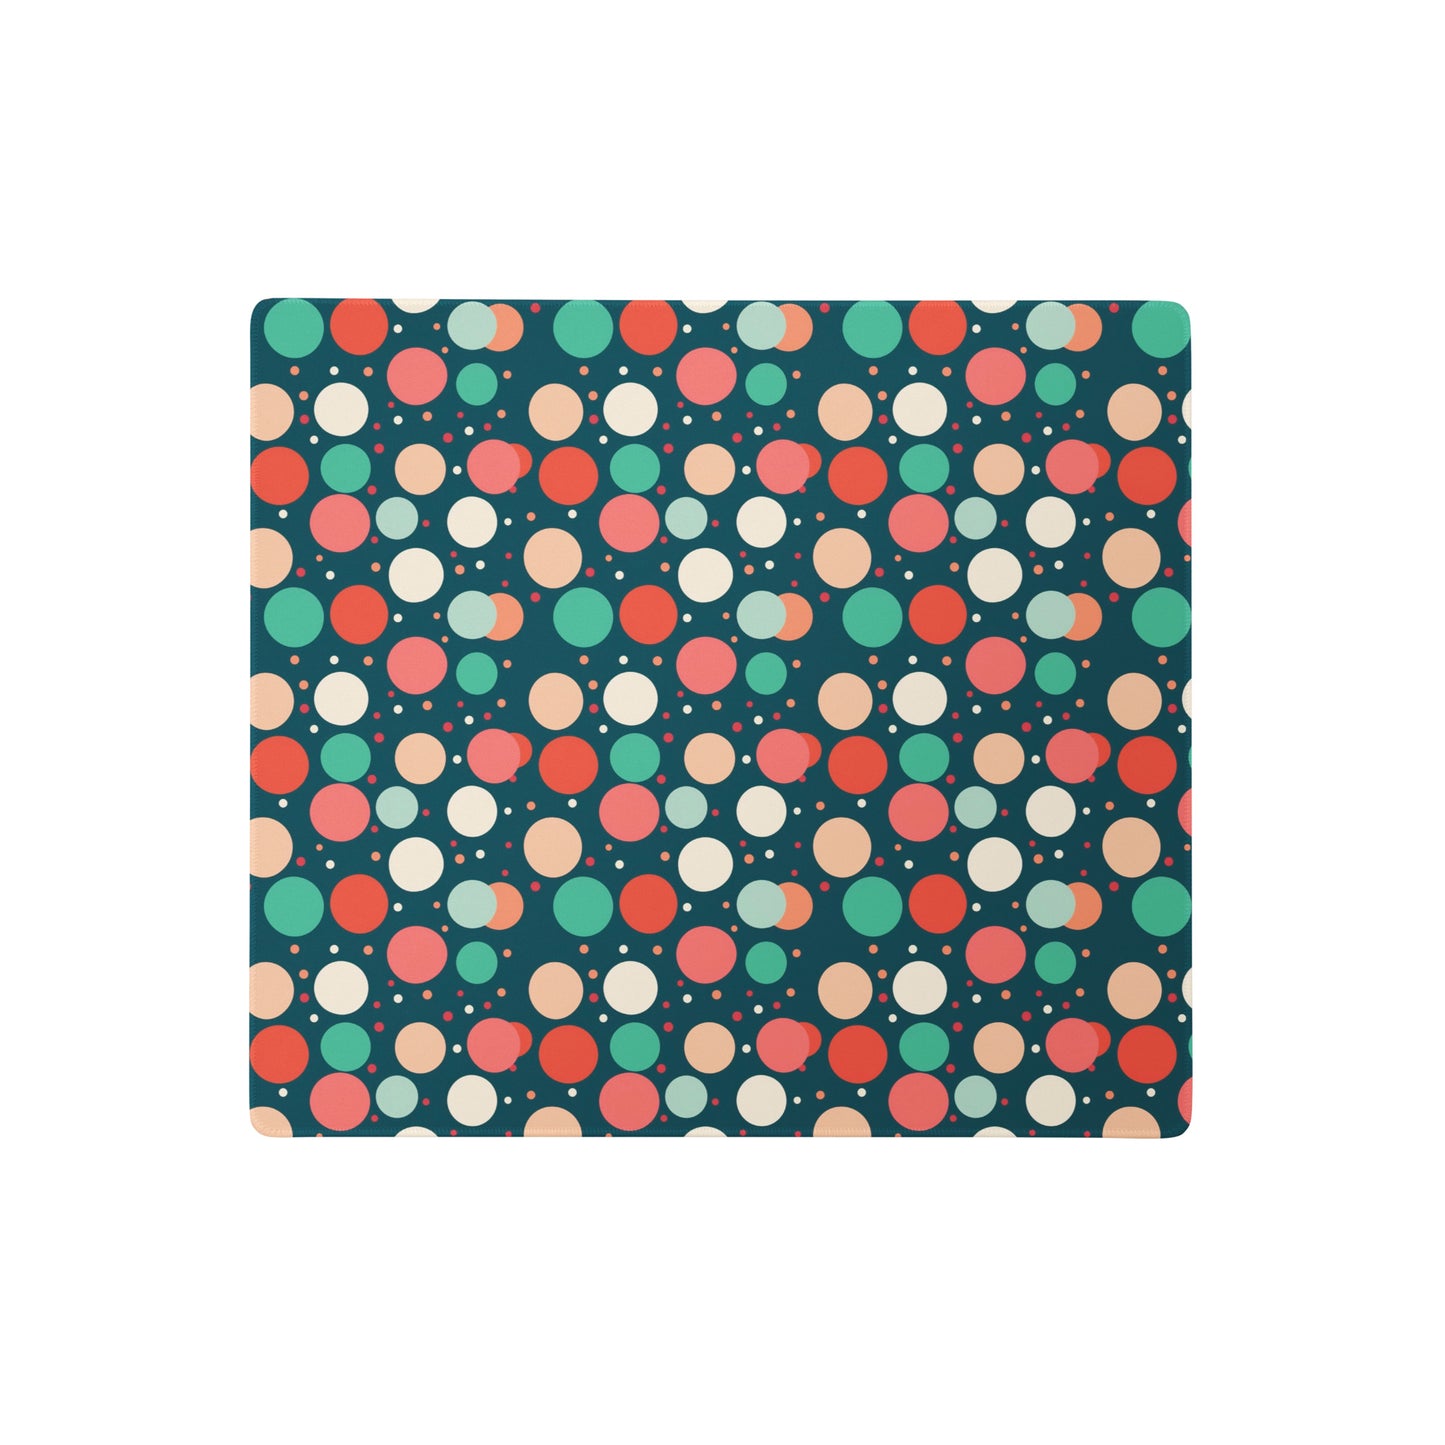  A 18" x 16" desk pad with red teal and yellow polka dot pattern.